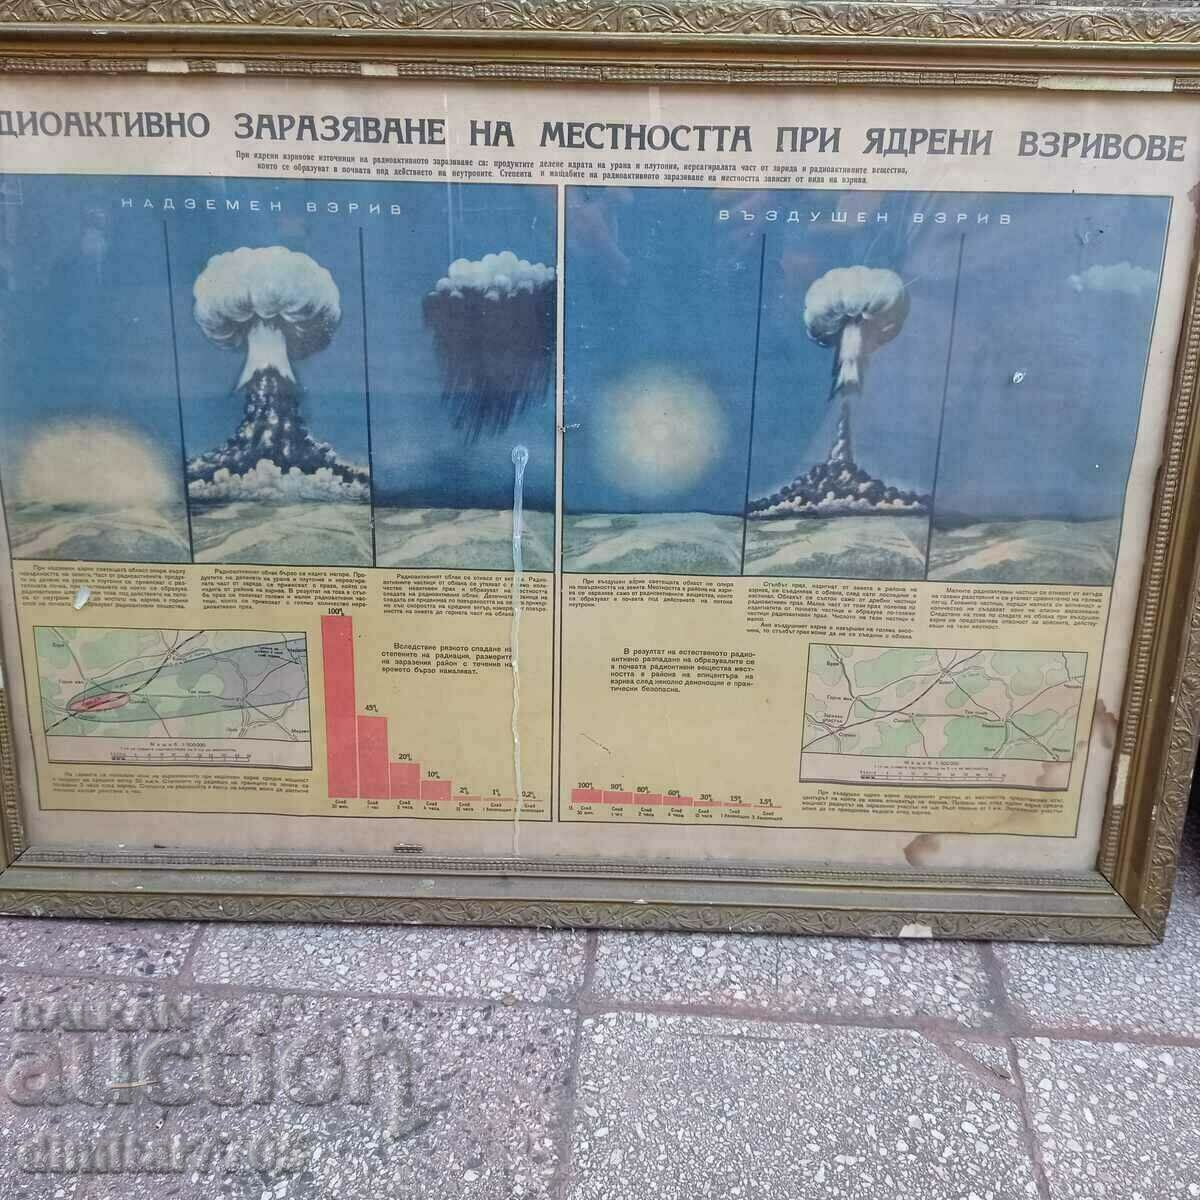 Radioactive contamination of the area during nuclear explosions